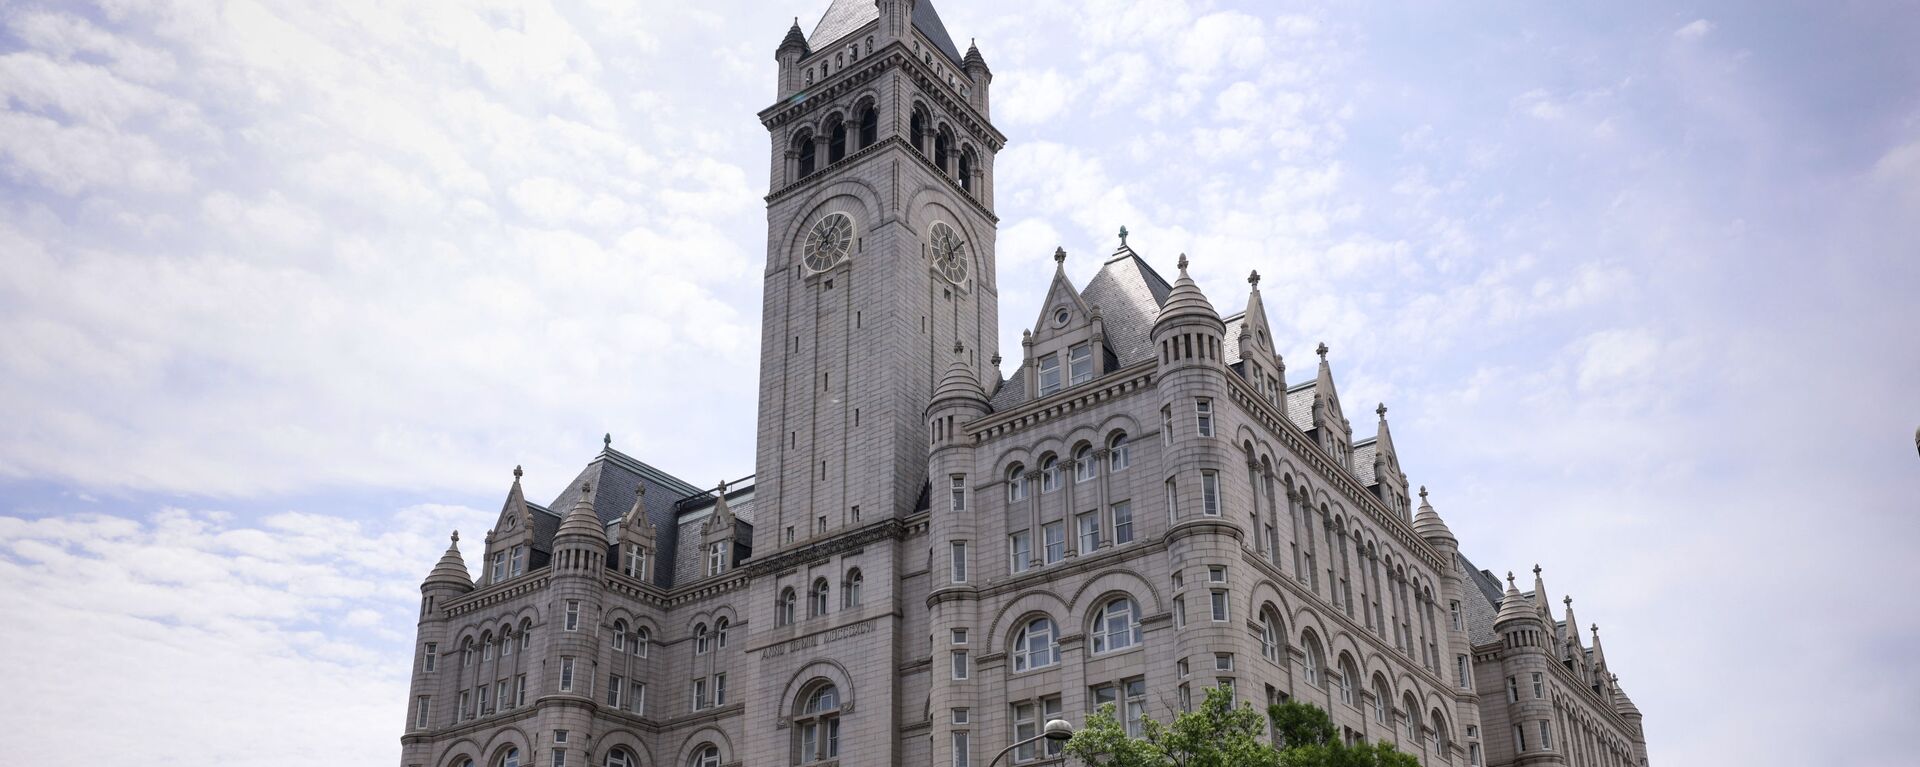 The Trump International Hotel is seen on June 02, 2021 in Washington, DC. The Trump Organization is attempting to sell the lease to the hotel after failing to in 2019 before the pandemic hit.  - Sputnik International, 1920, 14.11.2021